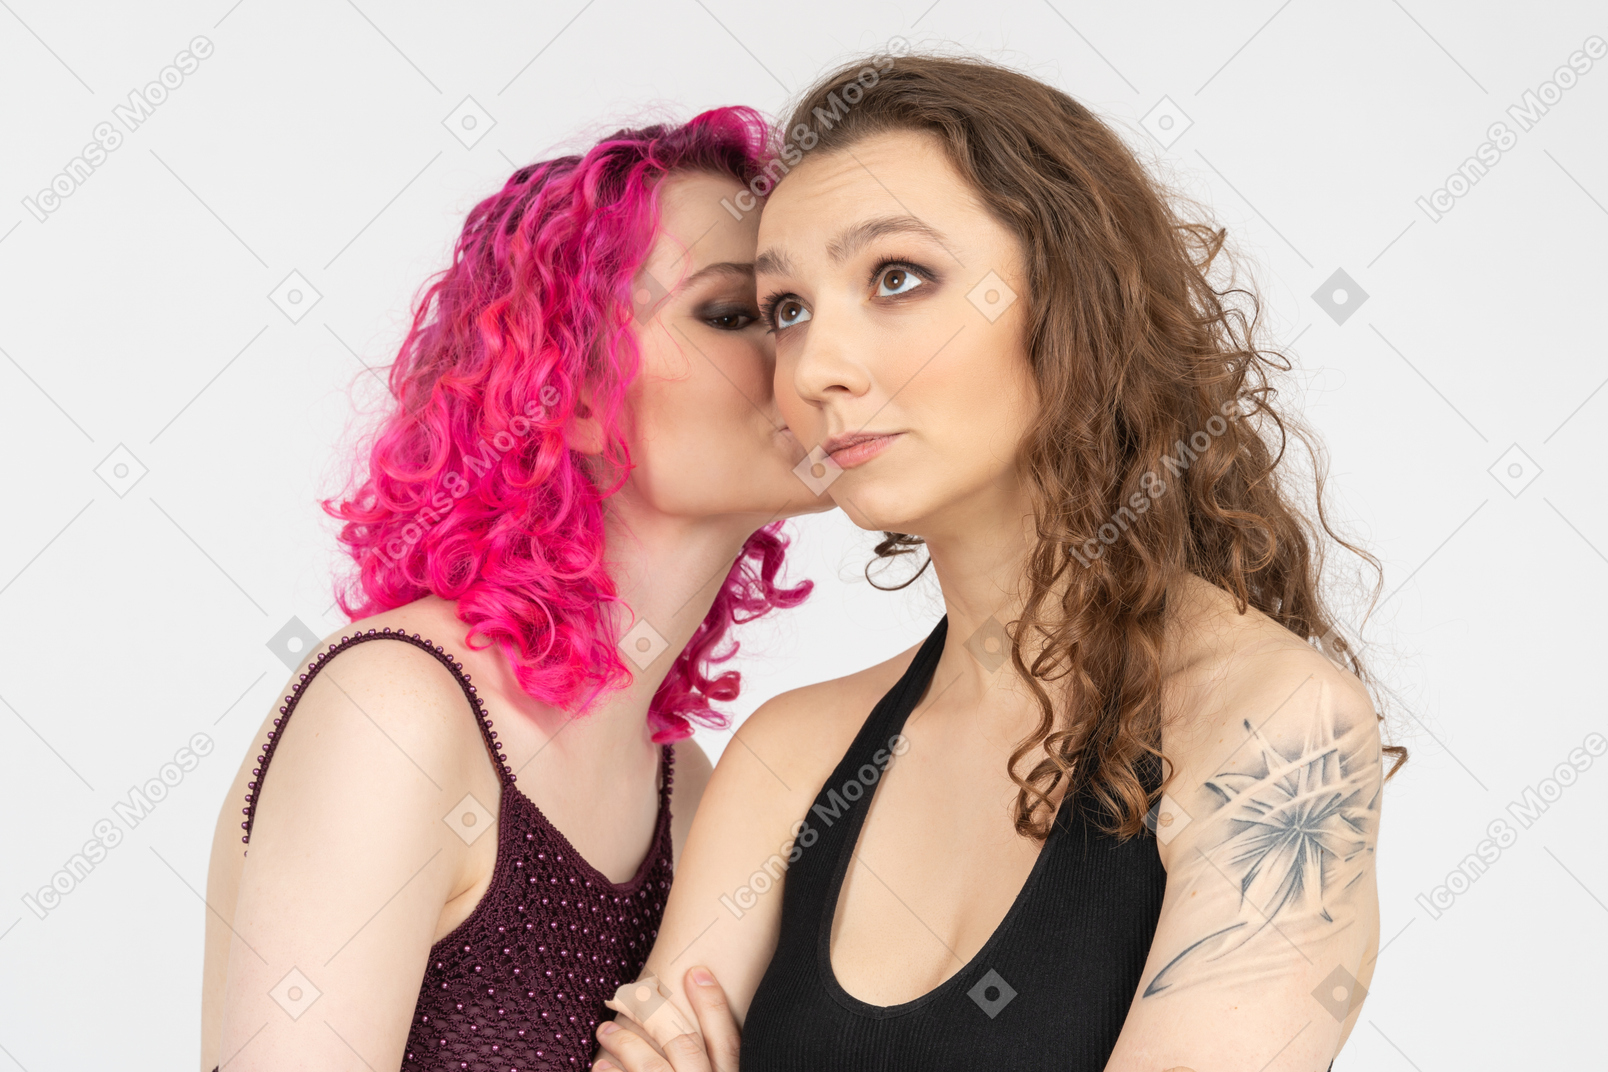 Pink haired girl whispering in brown haired girl ear